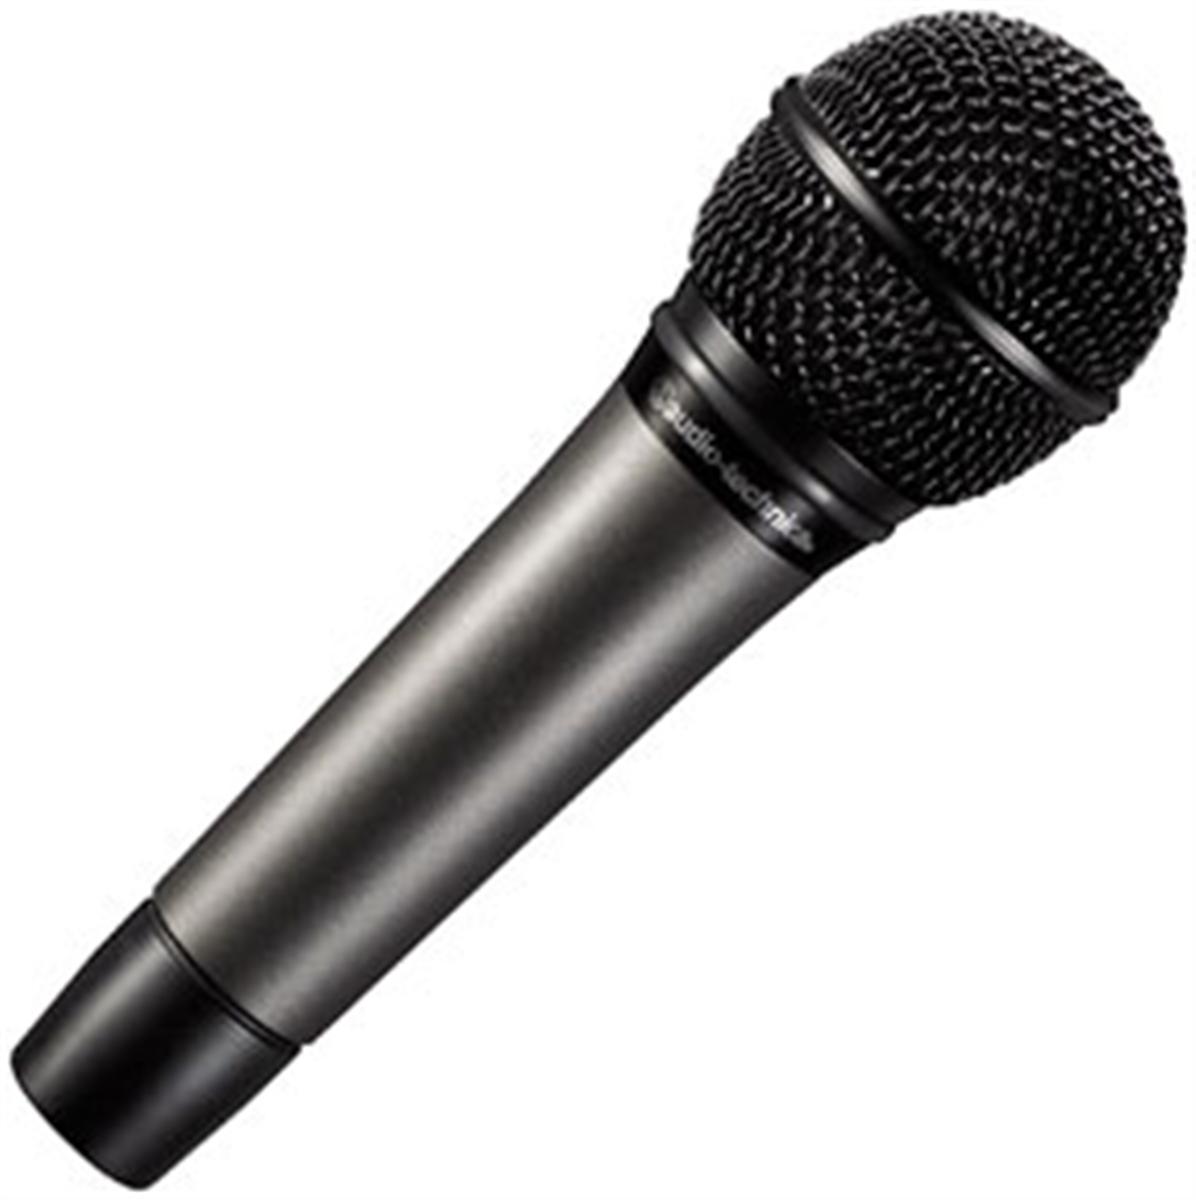 Free microphone clipart